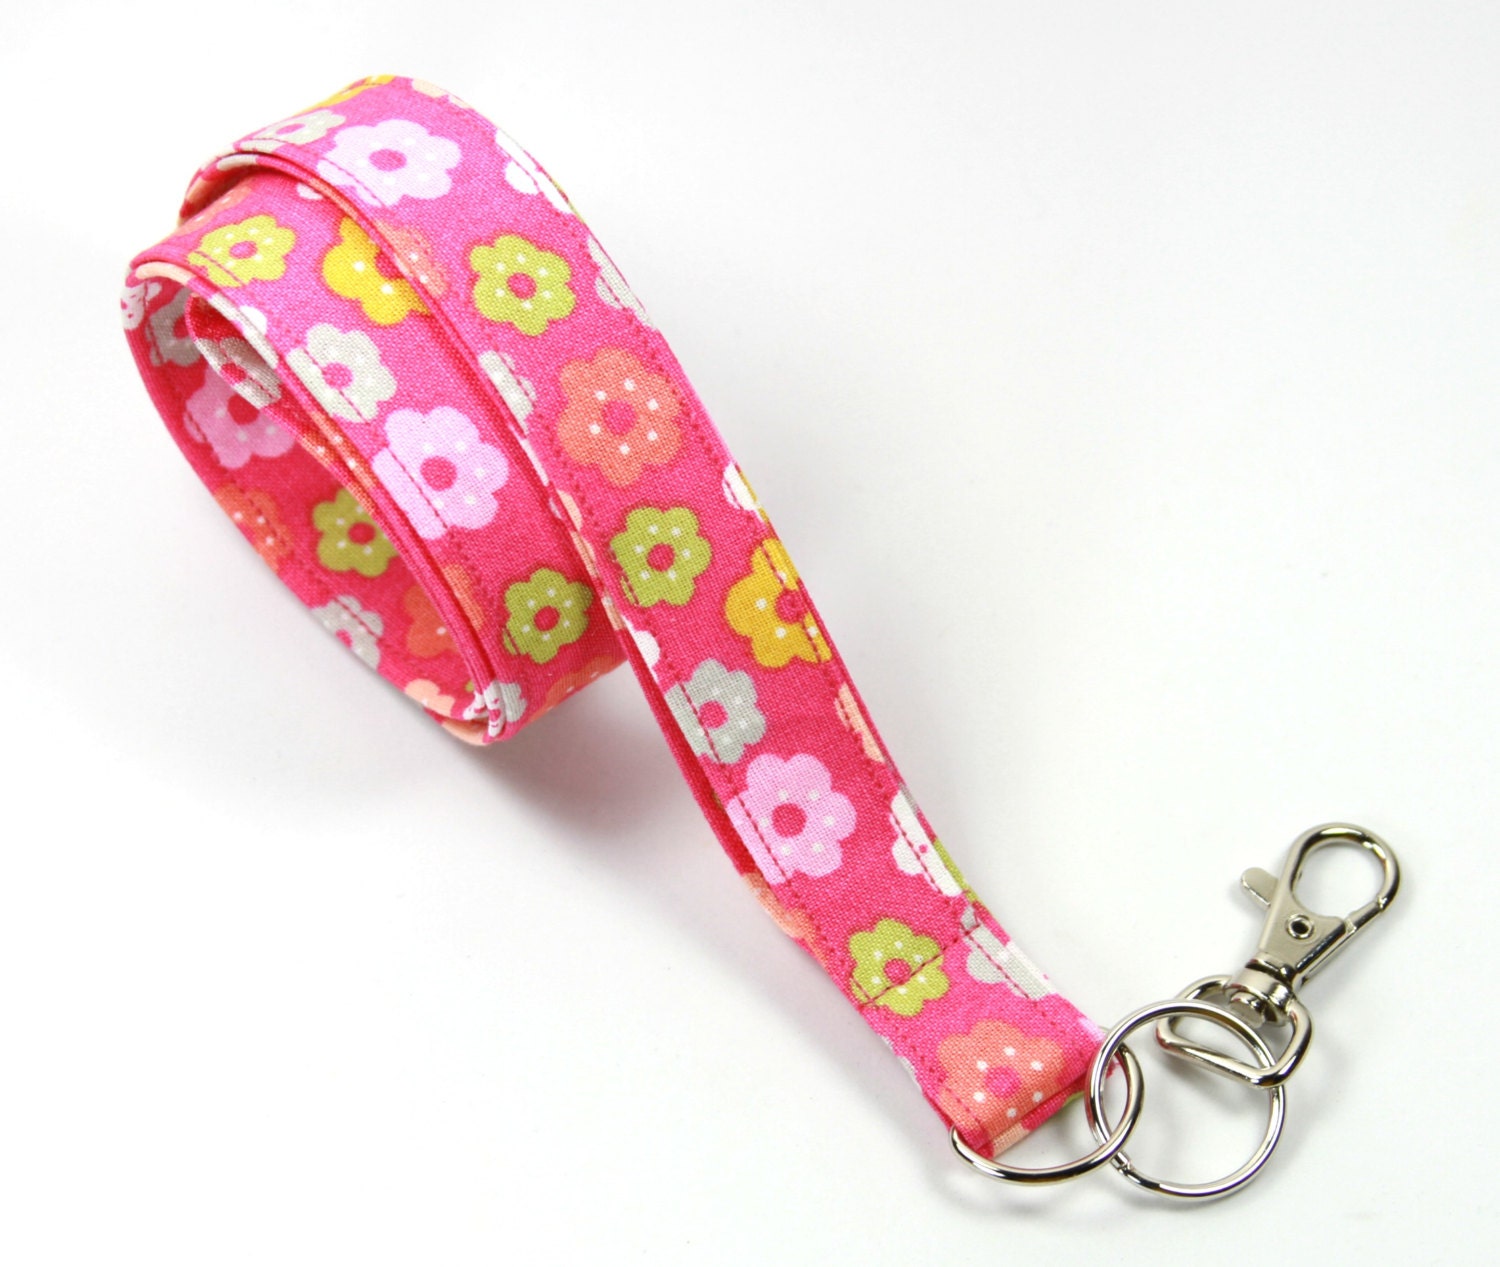 FABRIC LANYARDS Cute Key Holders Cute Keychains Floral 